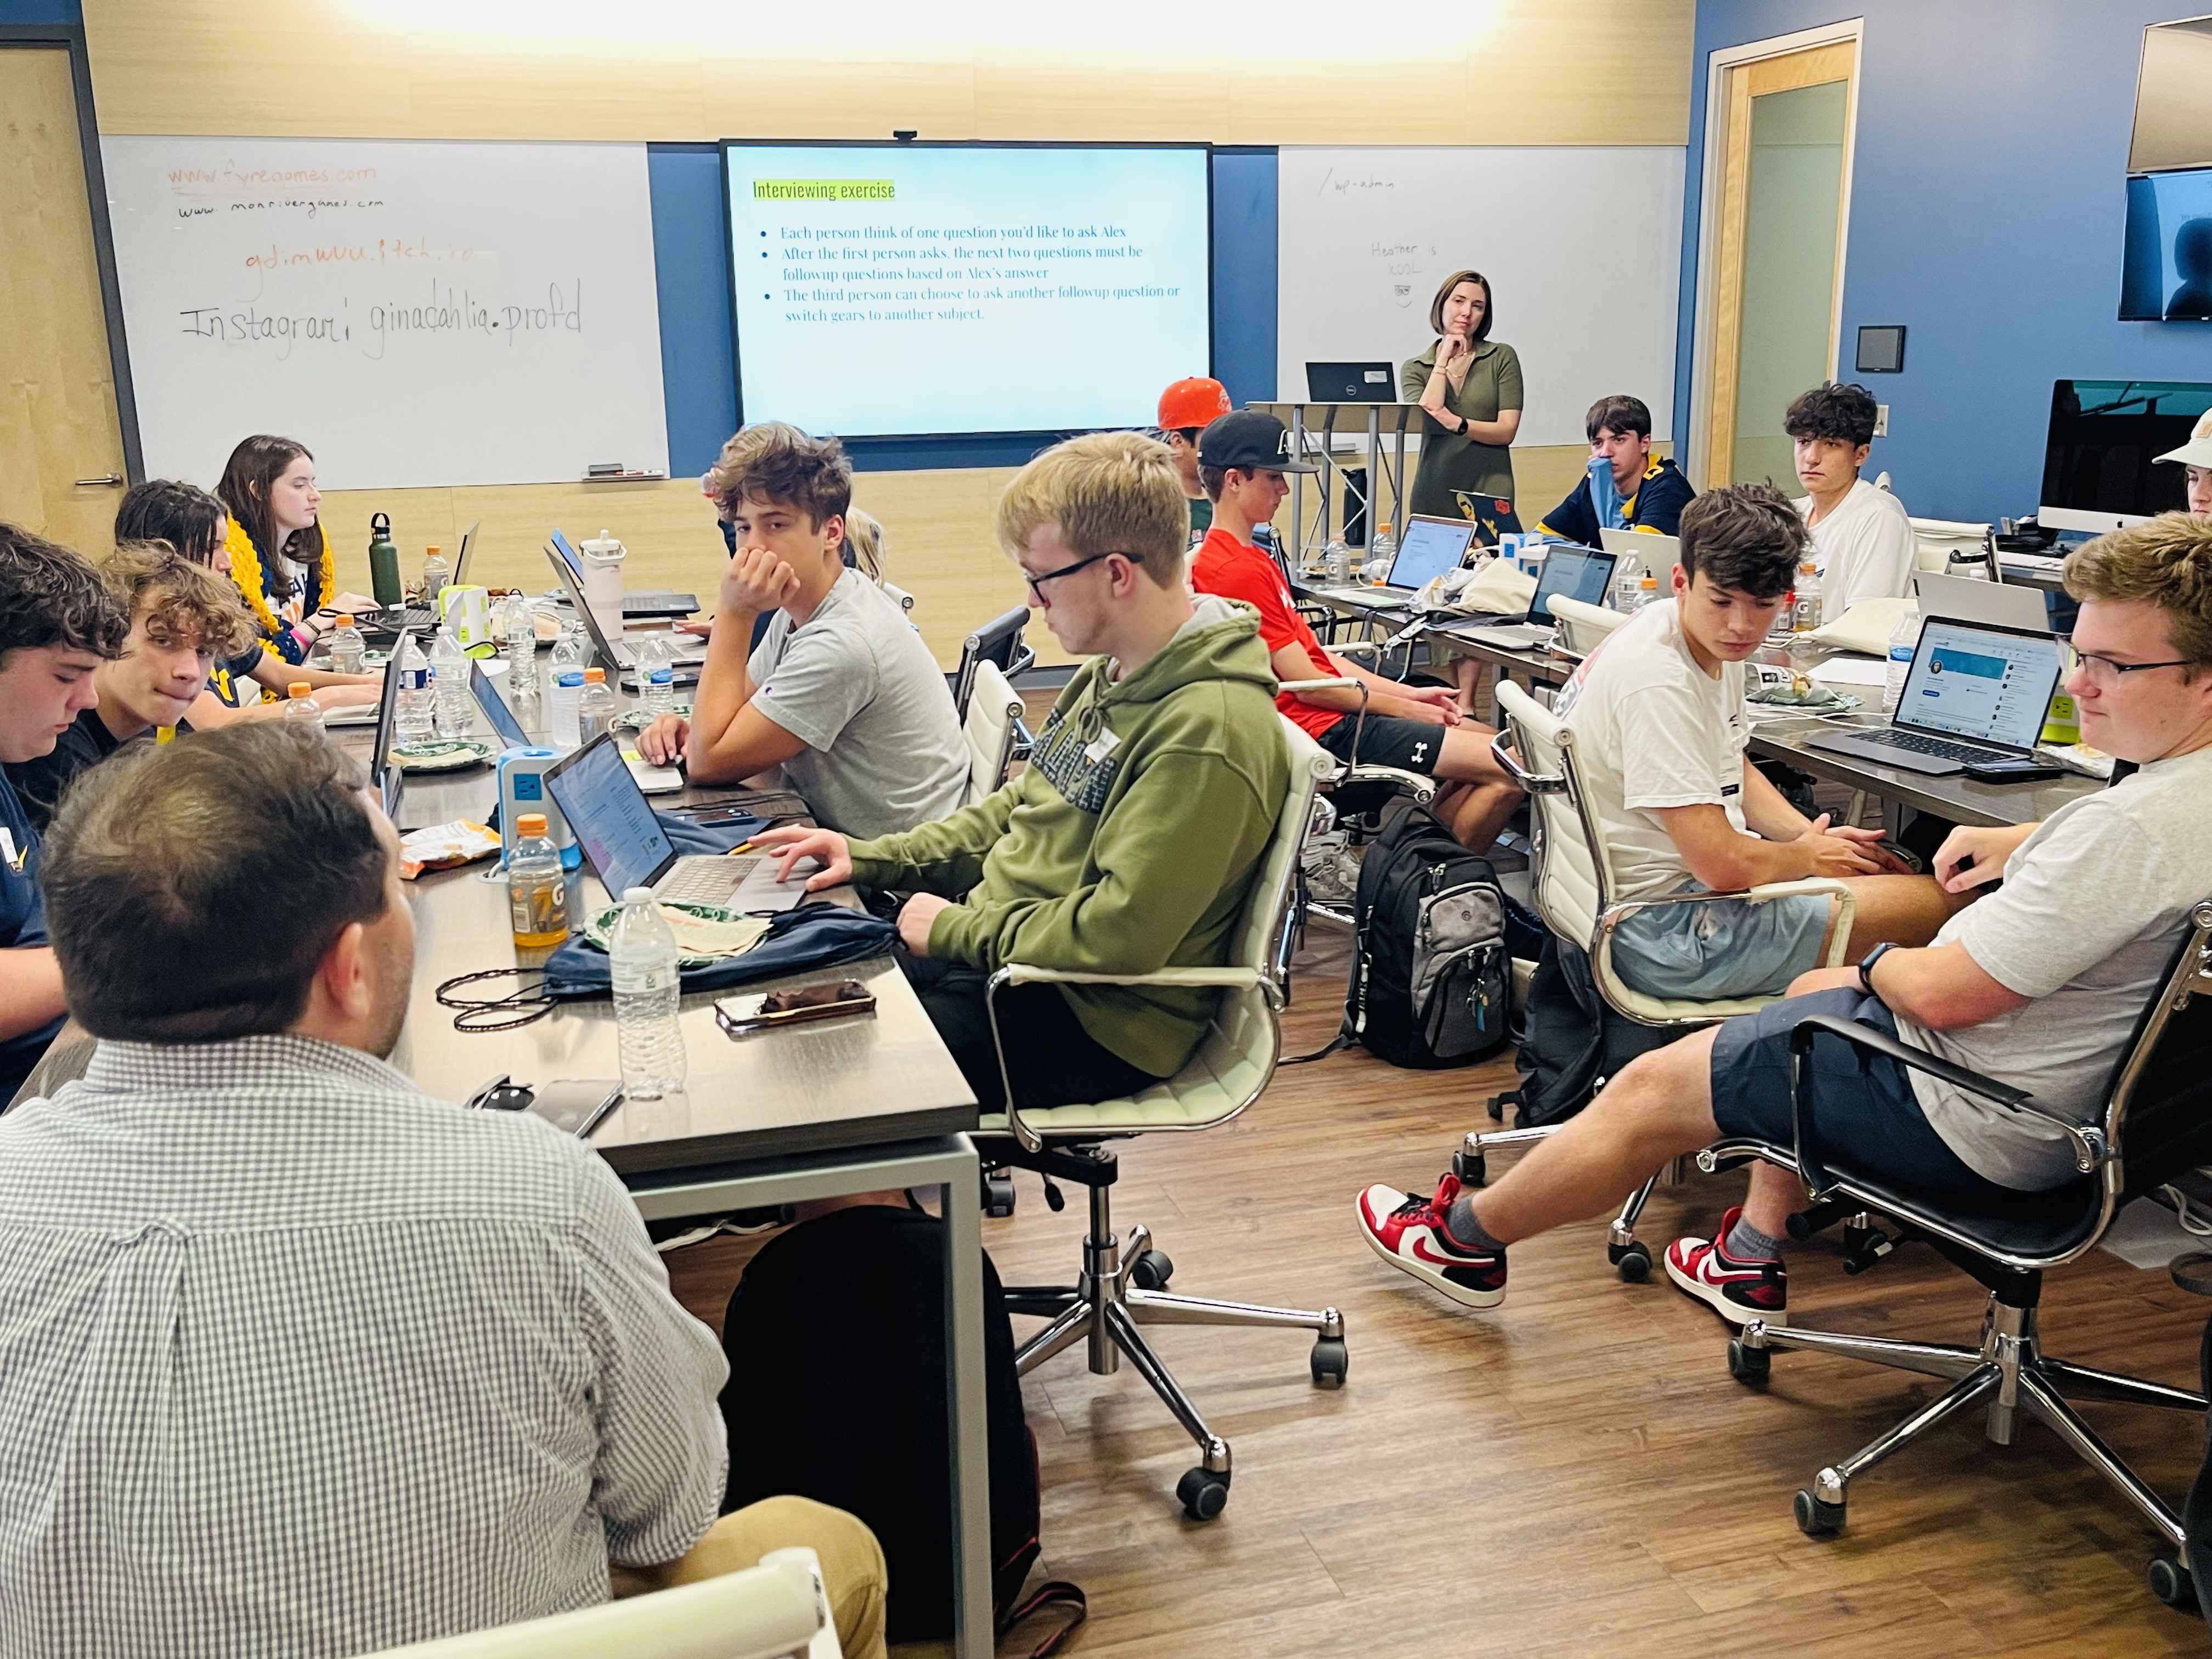 Students working on computers at Media Innovation Center